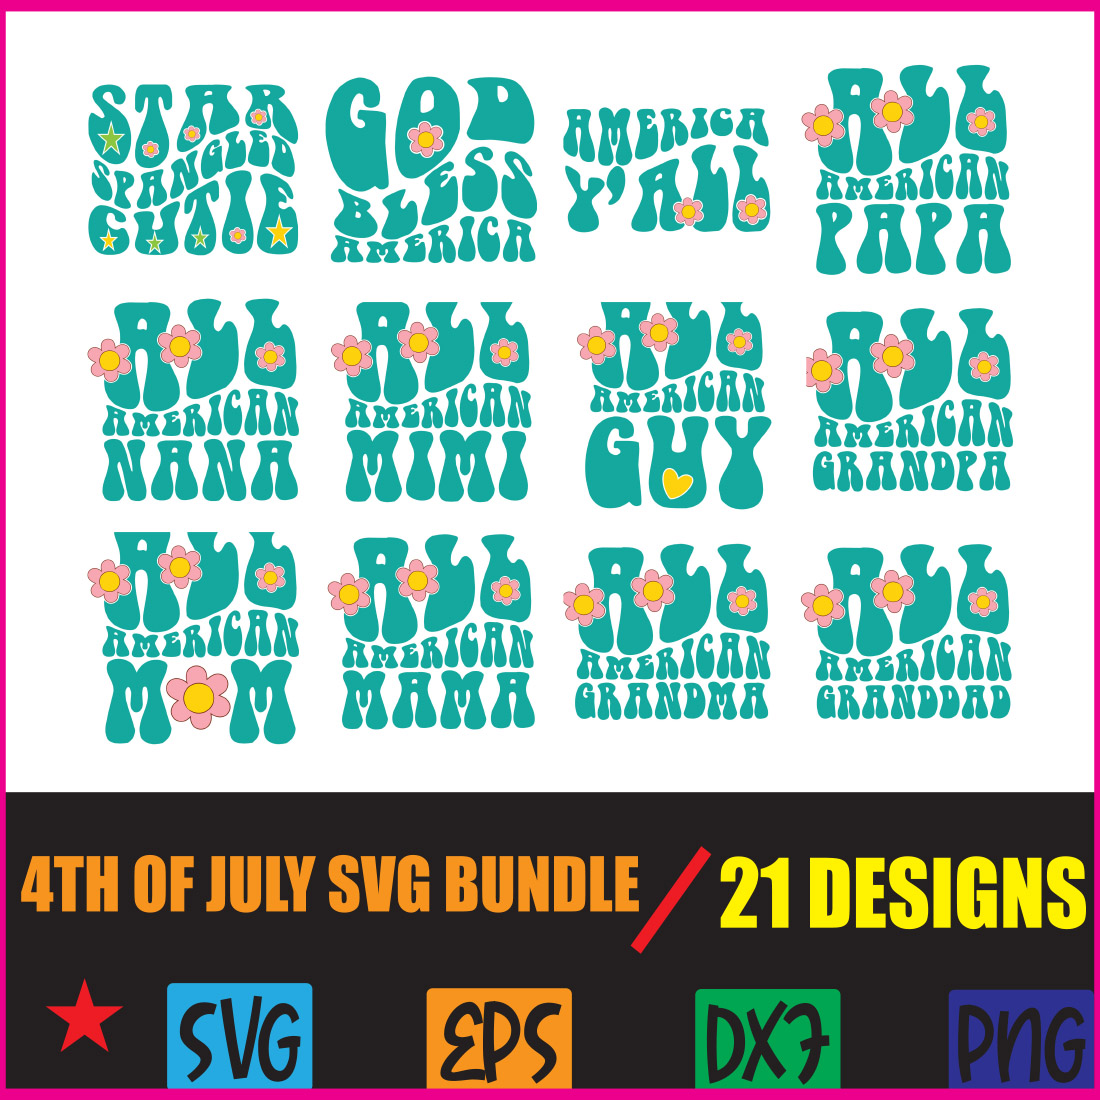 4th of July Svg Bundle preview image.